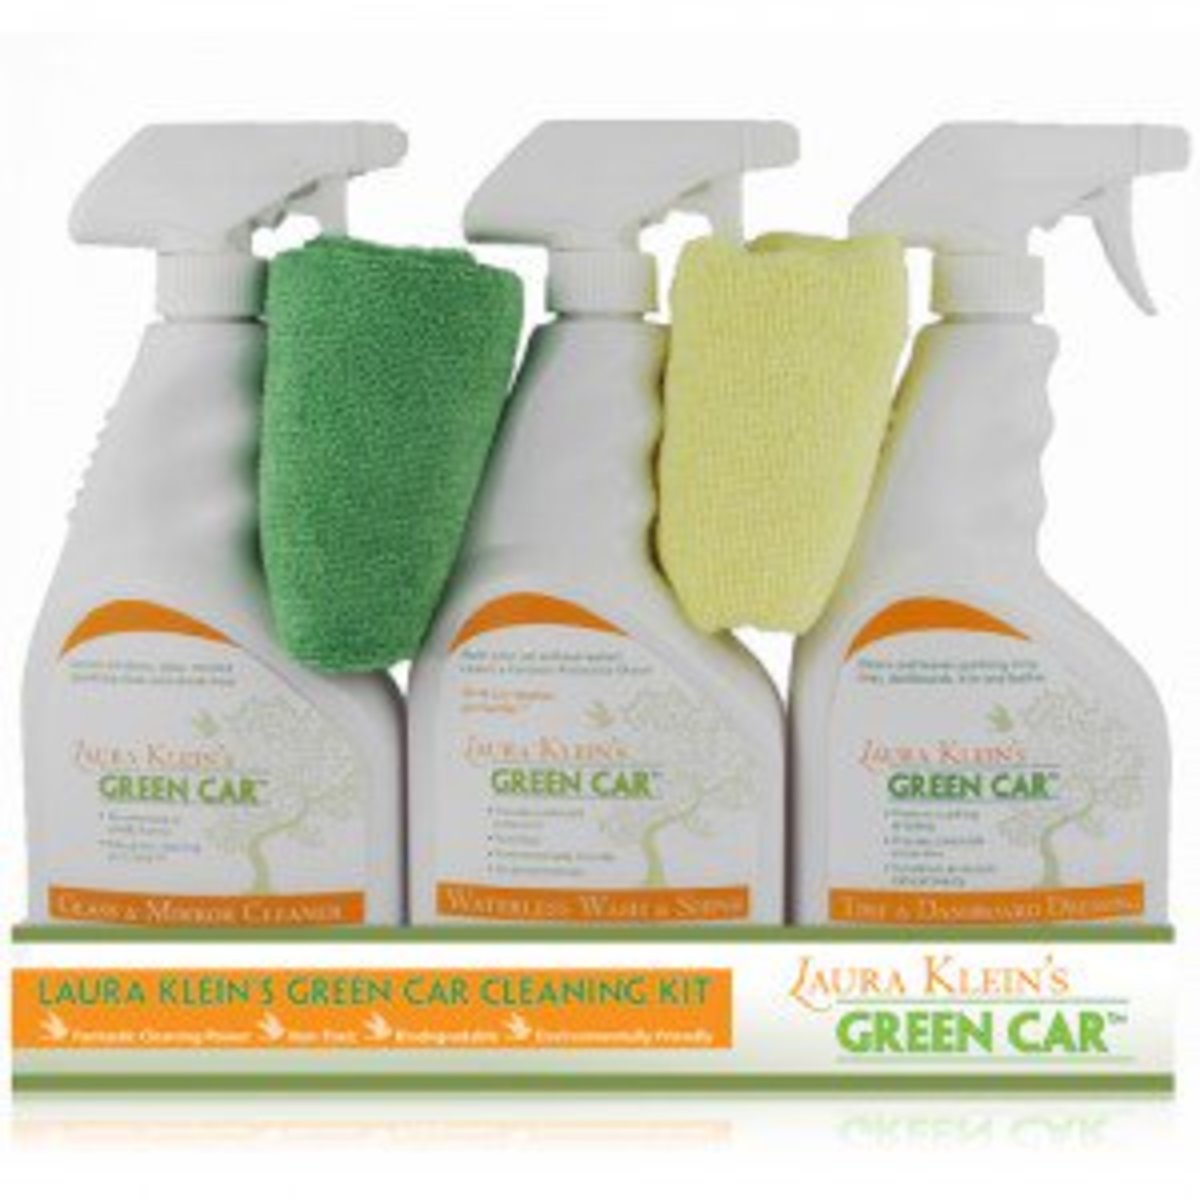 laura-kleins-green-car-cleaning-kit-300x3002